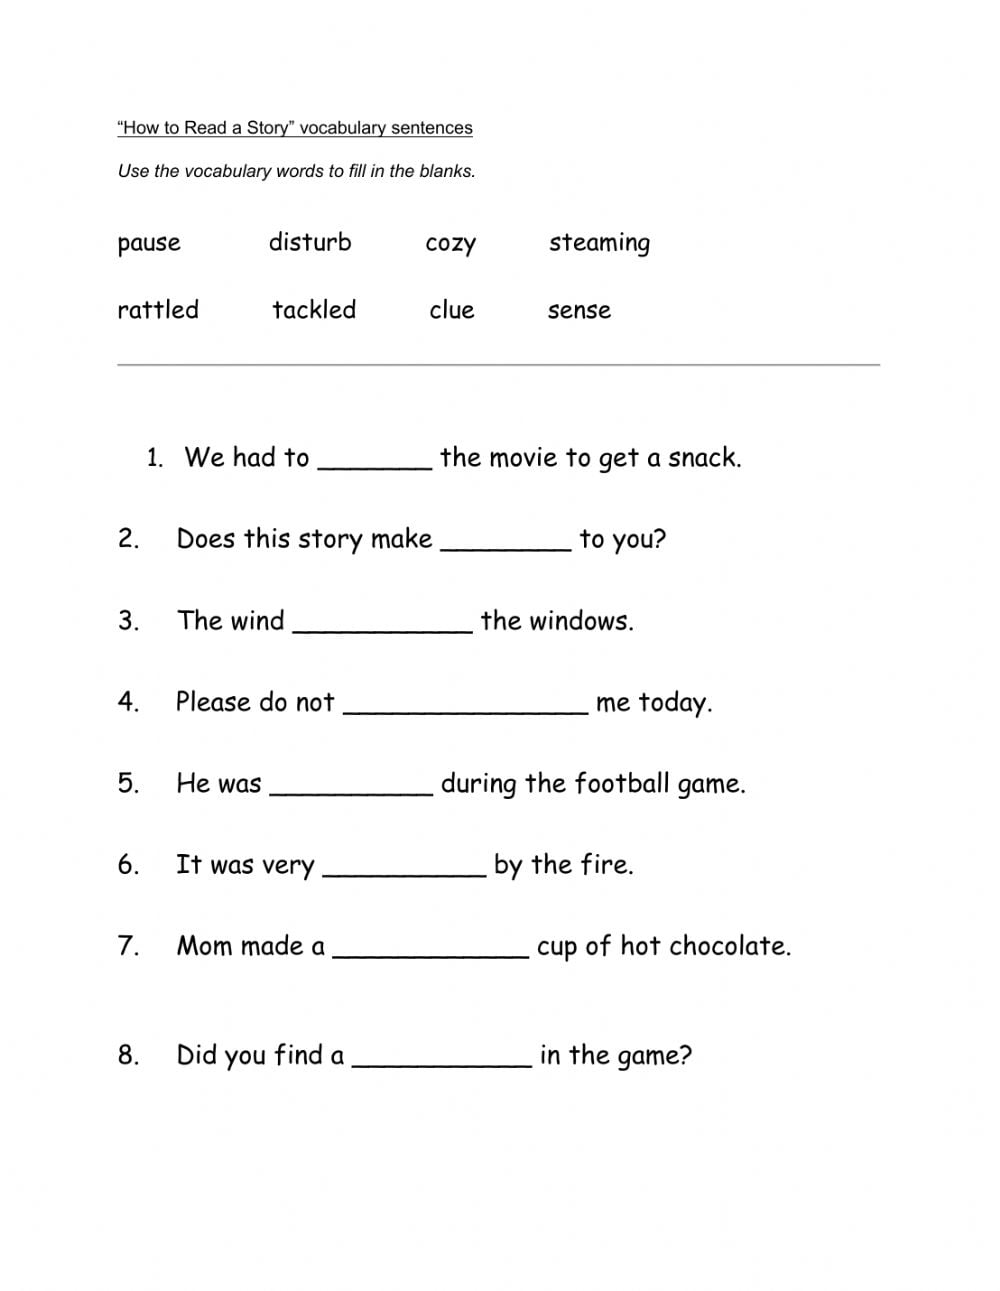 How To Read A Story Fill In Blank Vocabulary Worksheet